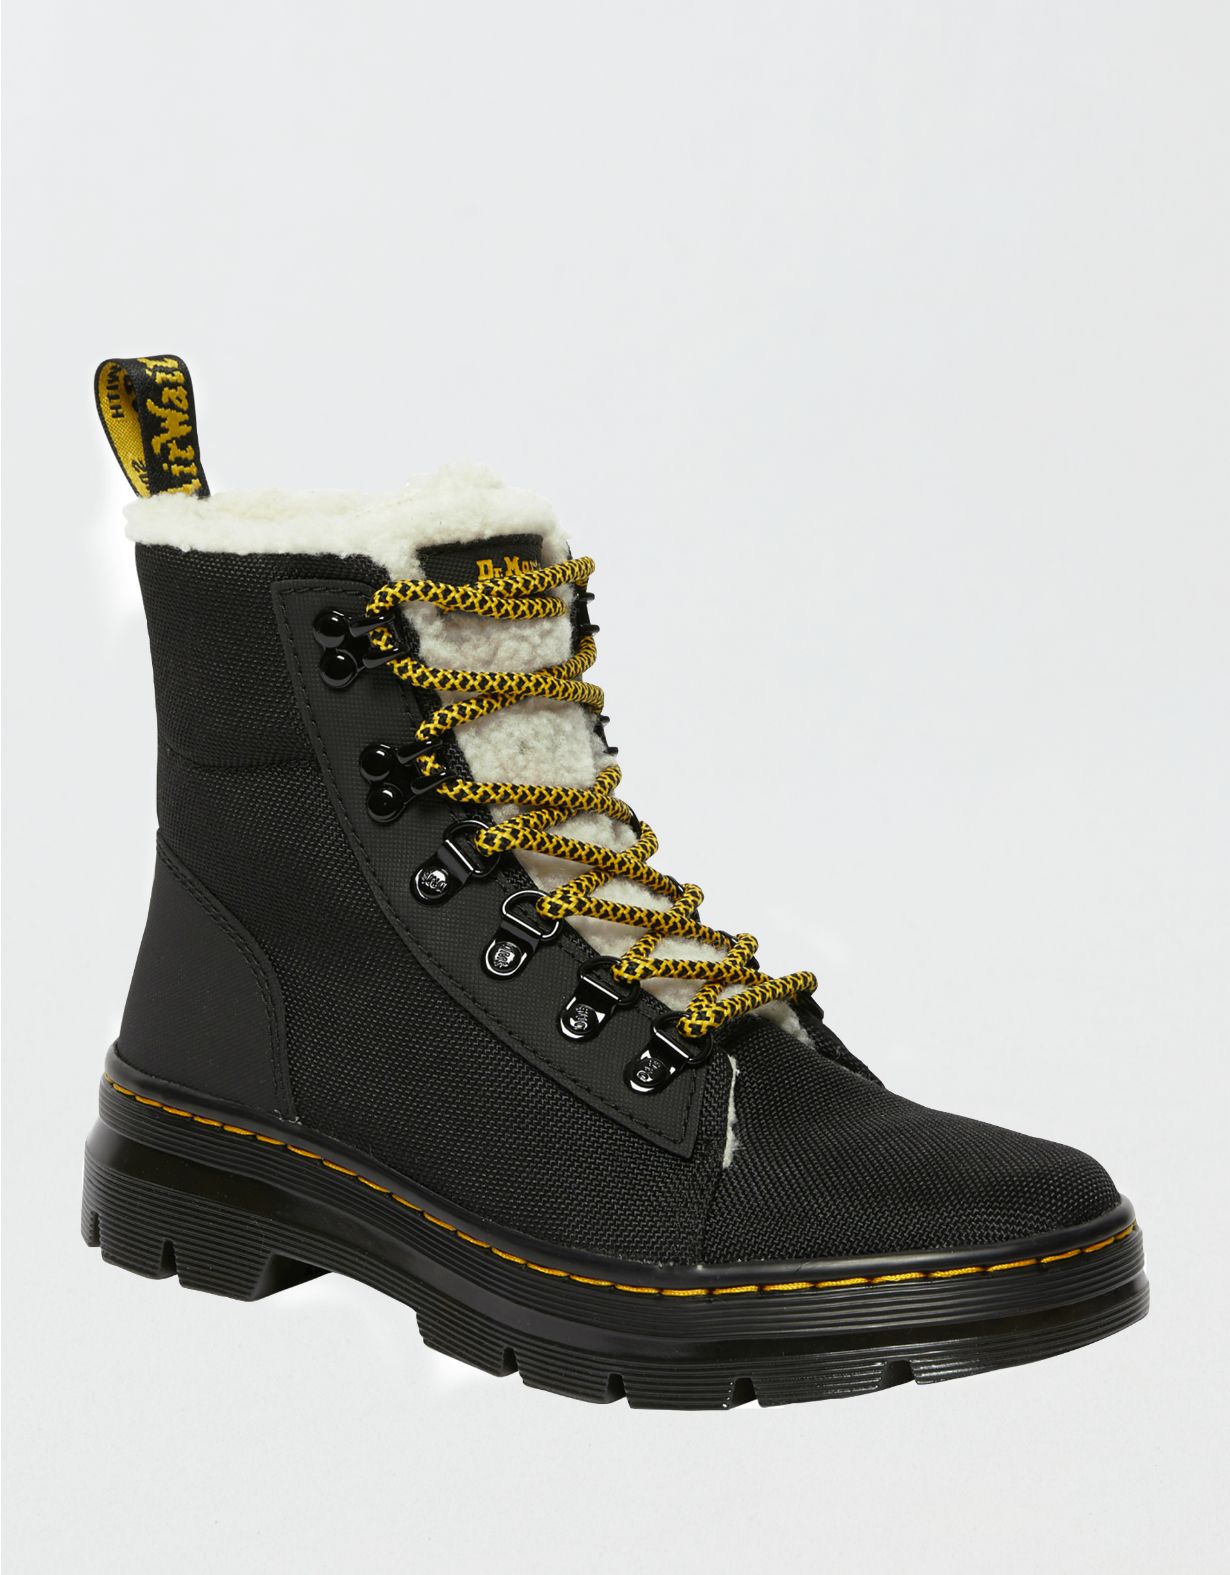 Dr. Martens Fur Lined Combs Boot